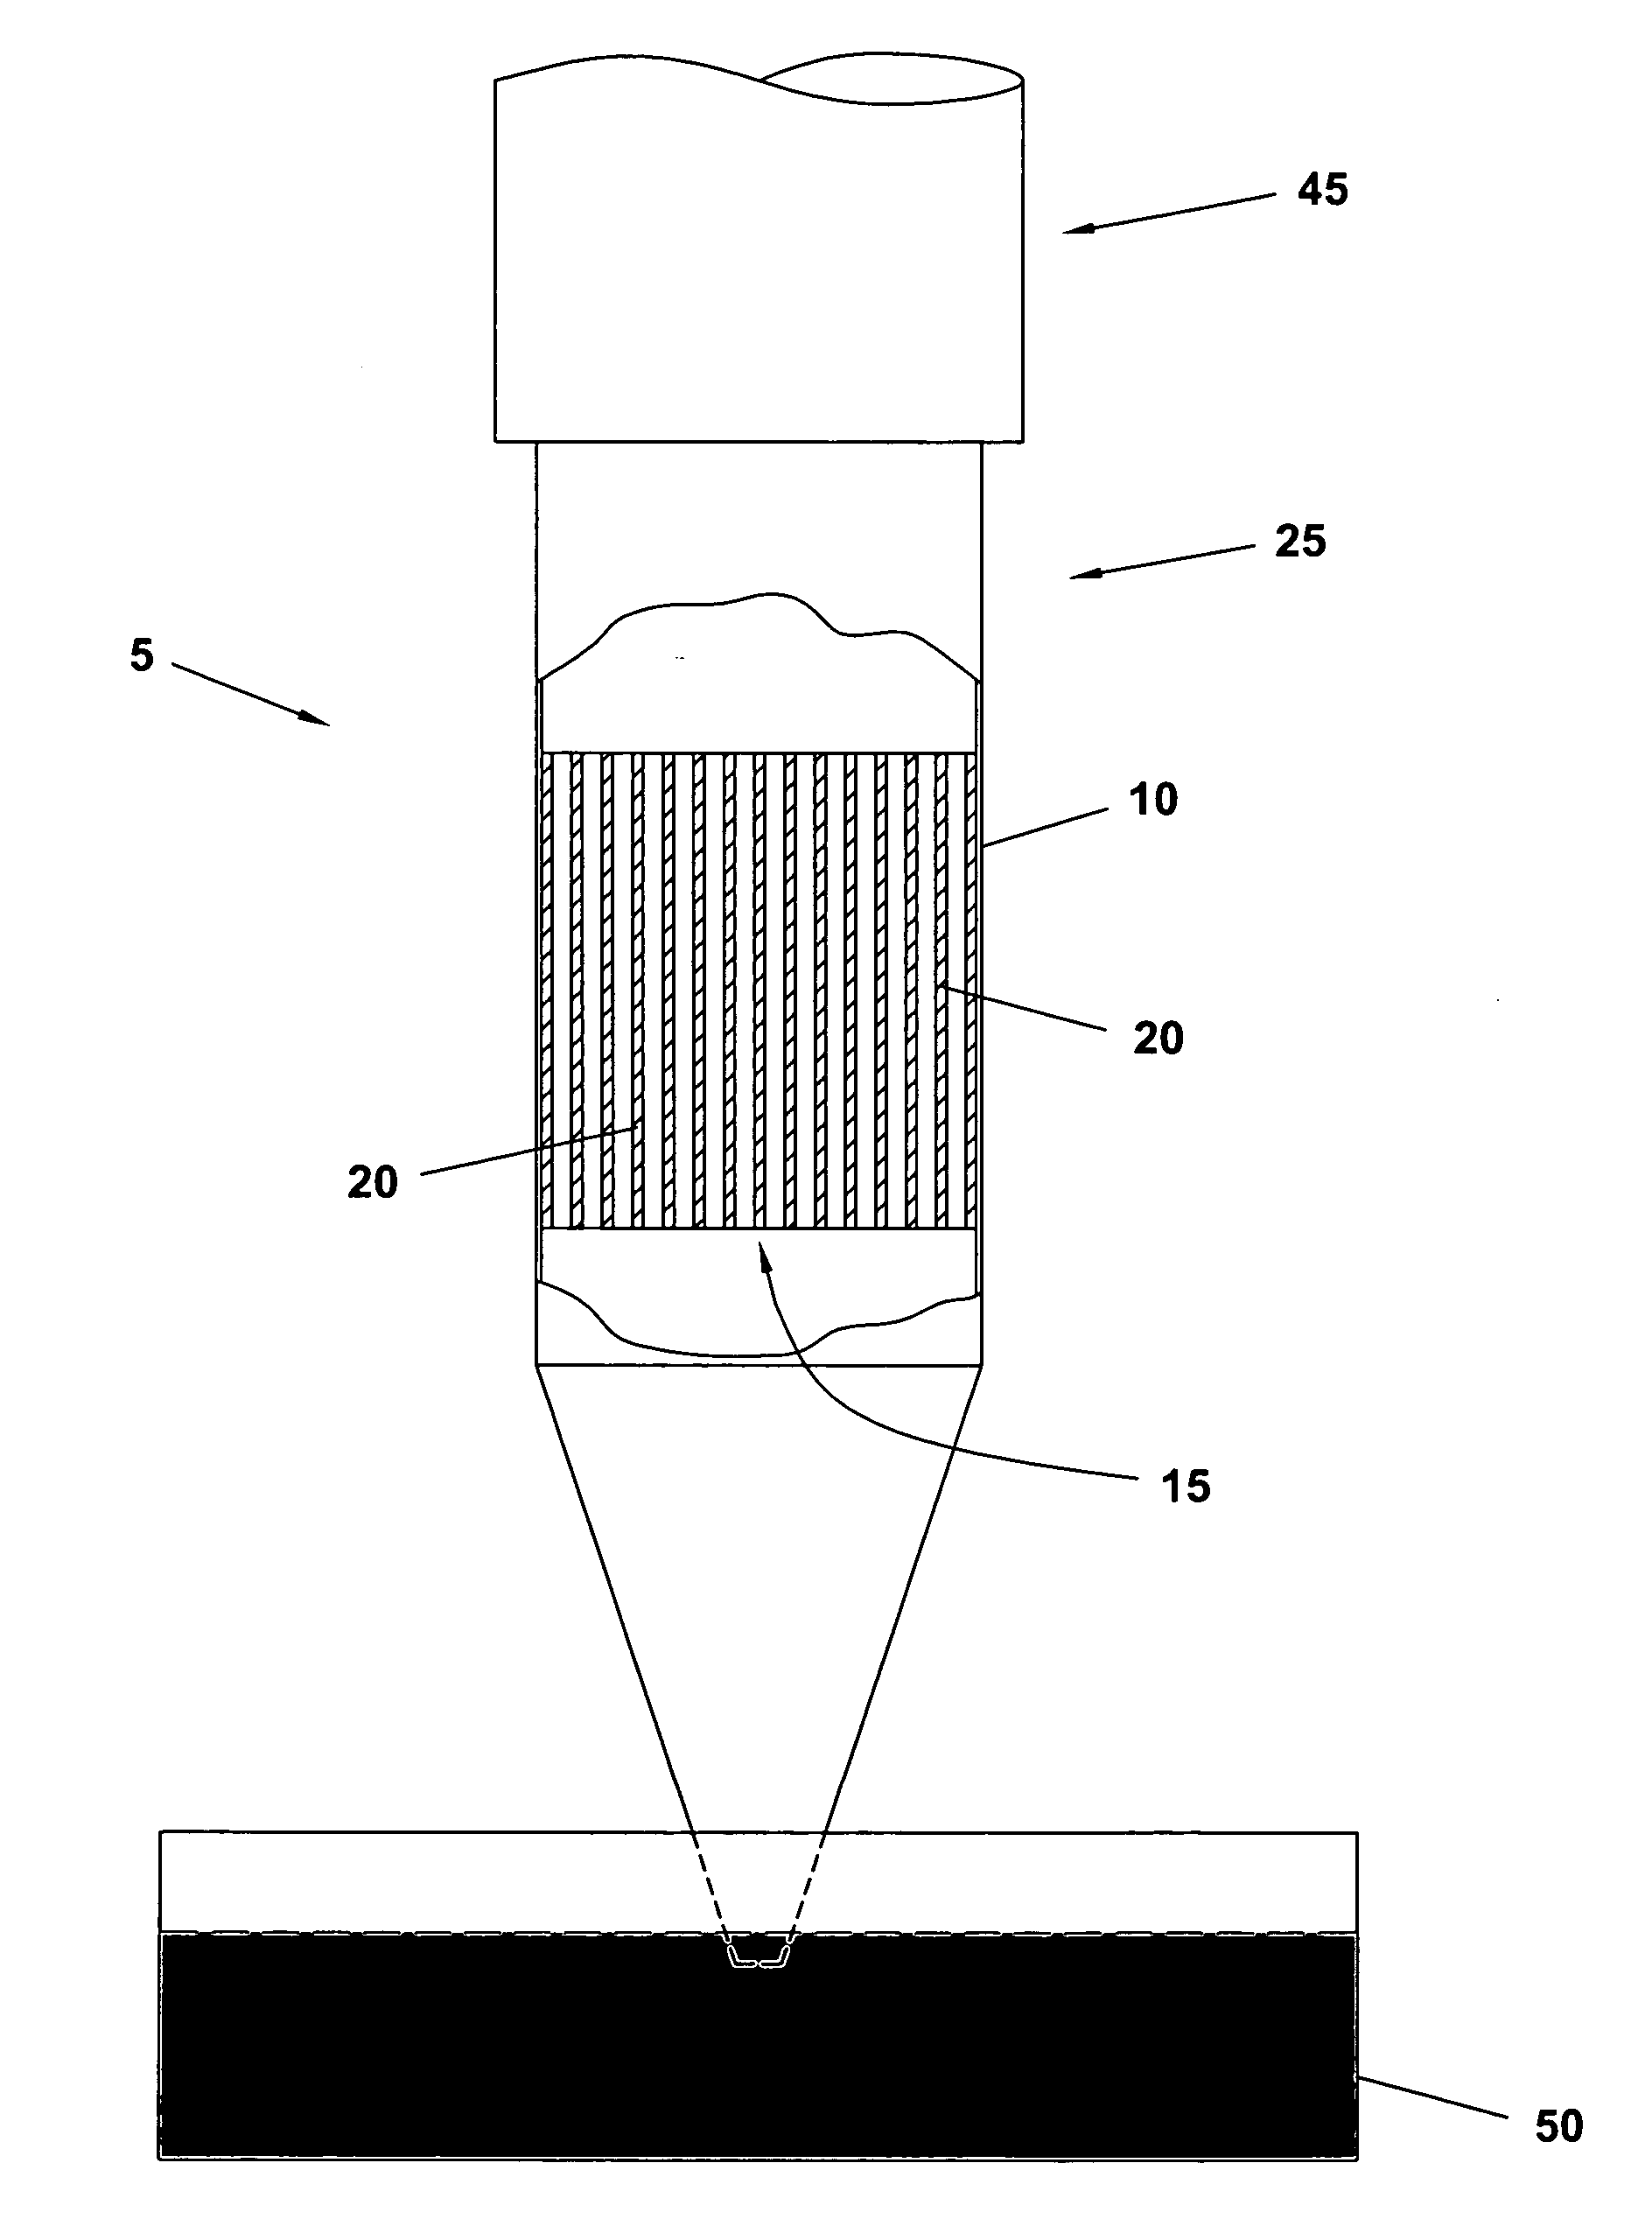 Small volume liquid-liquid extraction device and method of use